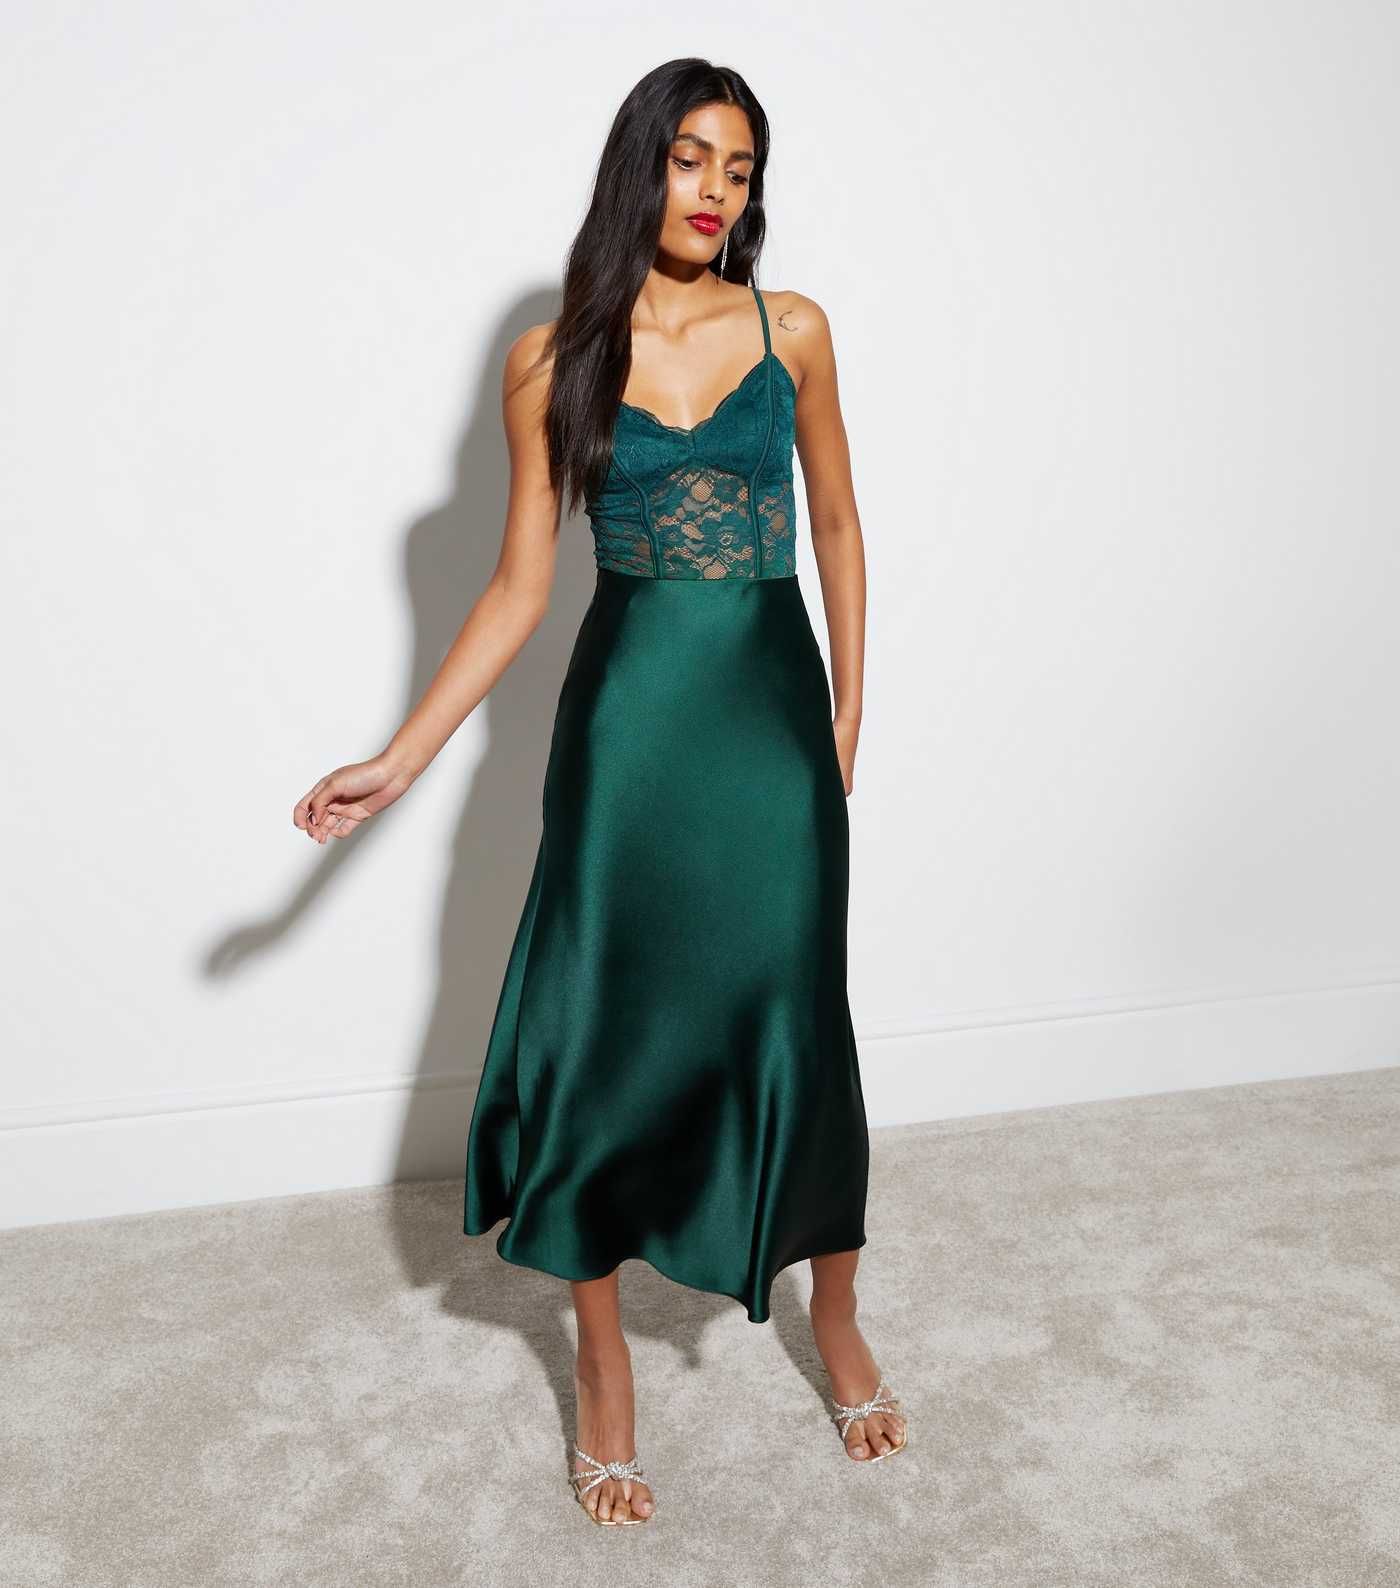 Green Satin Bias Cut Midaxi Skirt
						
						Add to Saved Items
						Remove from Saved Items | New Look (UK)